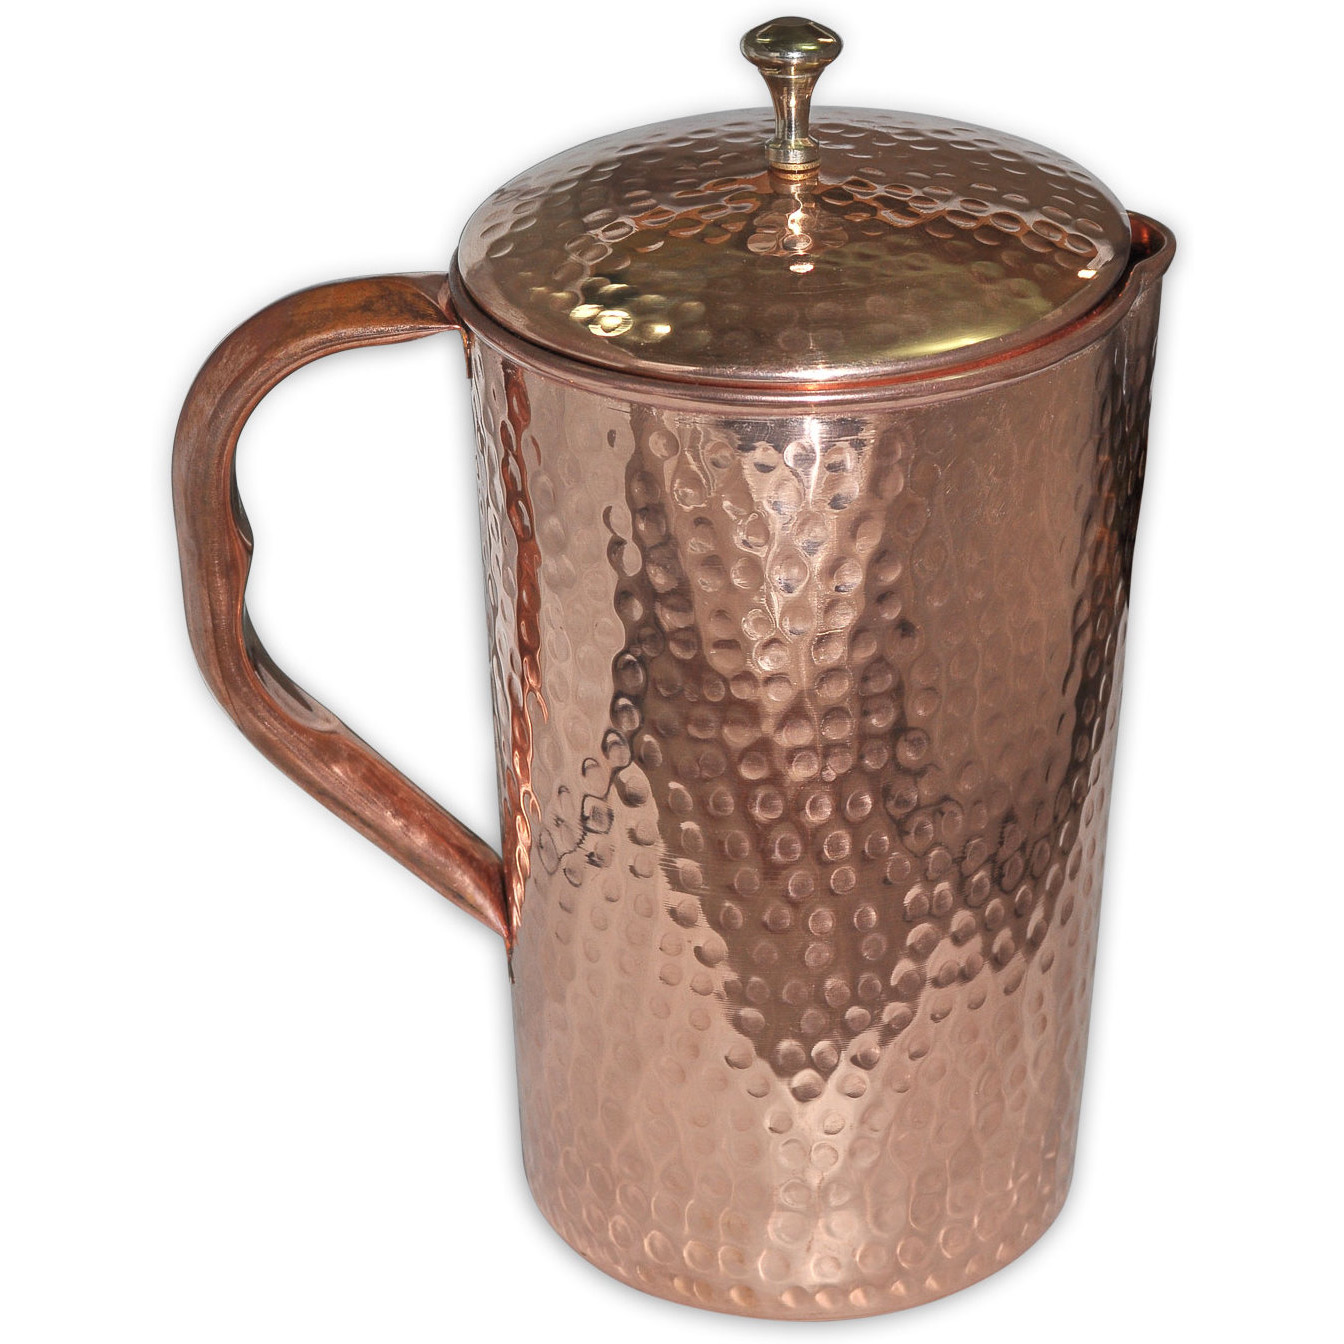 Prisha India Craft B. Best Quality Pure Copper Jug Water Pitcher Handmade Indian Copper Utensils for Ayurveda Healing Capacity 1.6 L